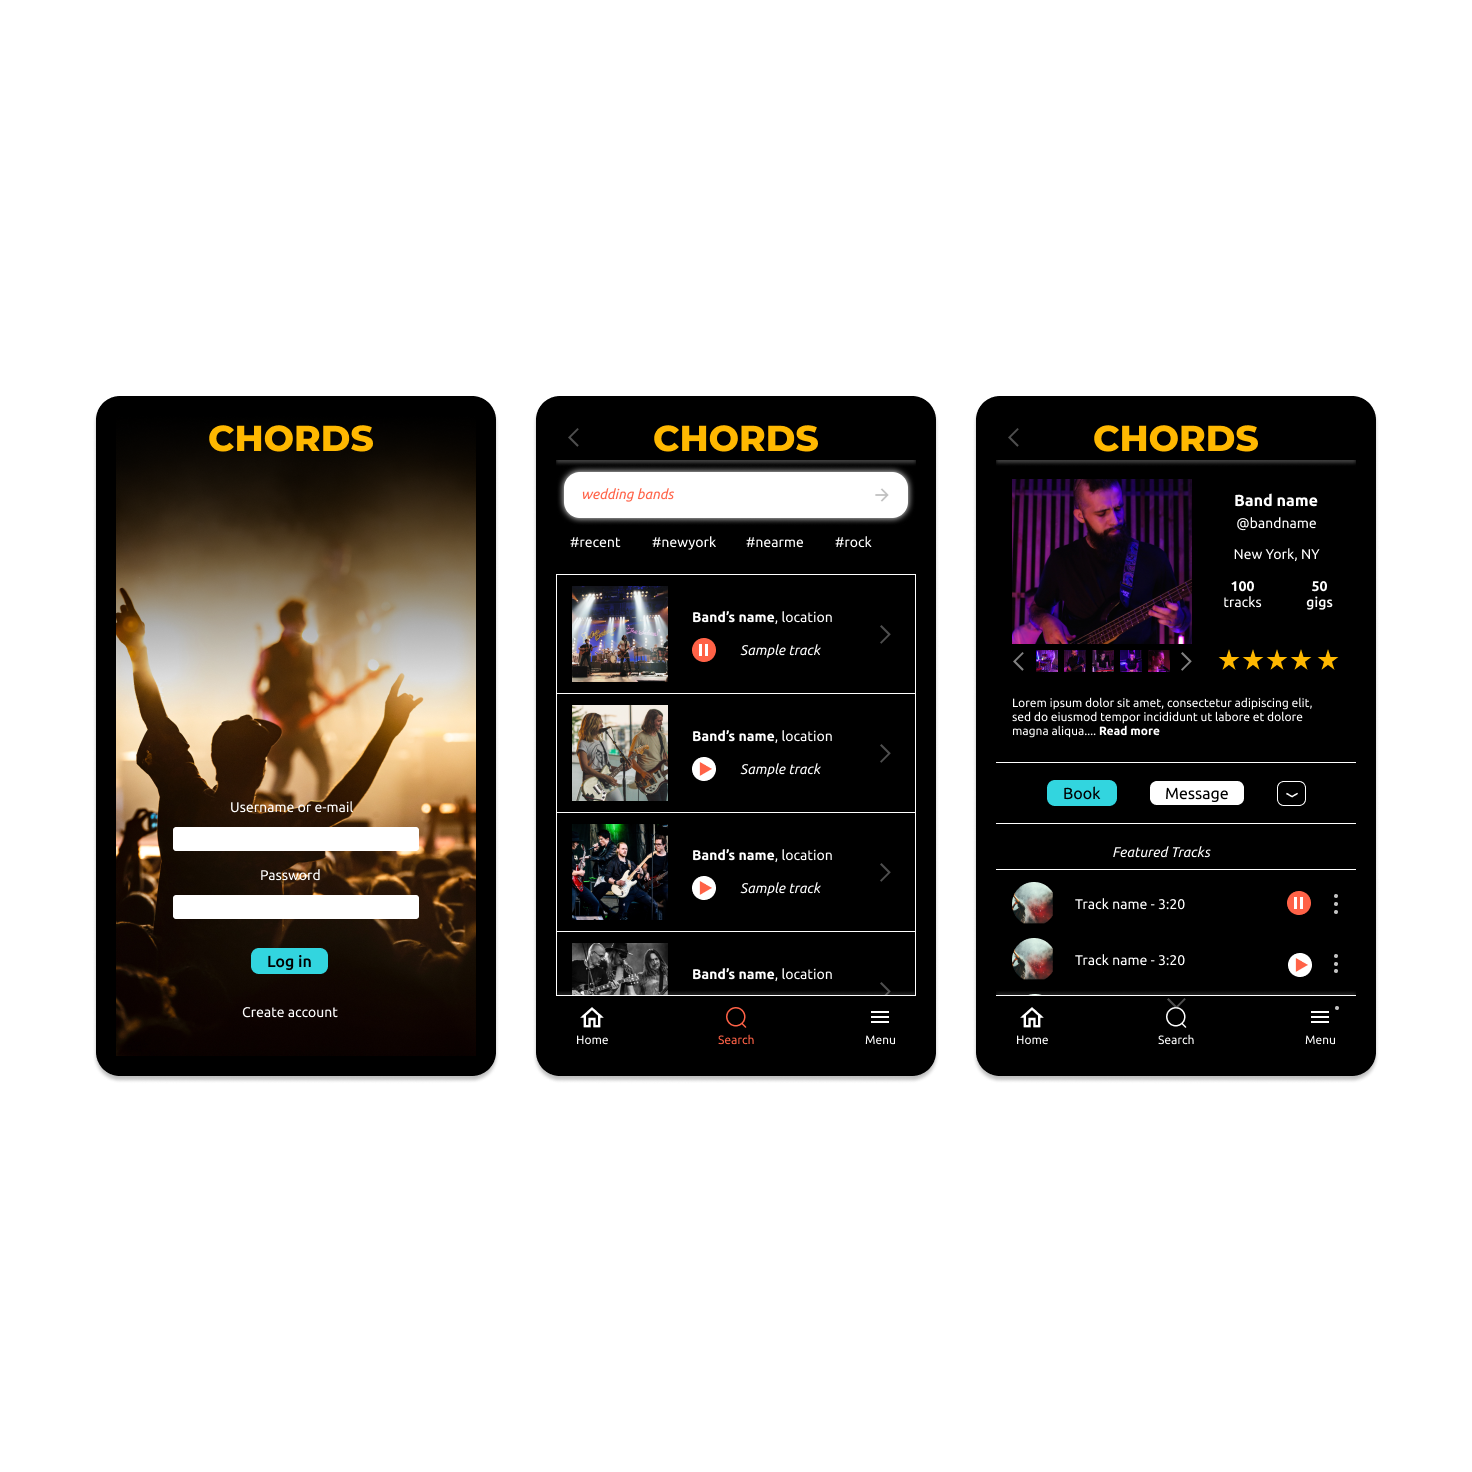 Chords musician booking app